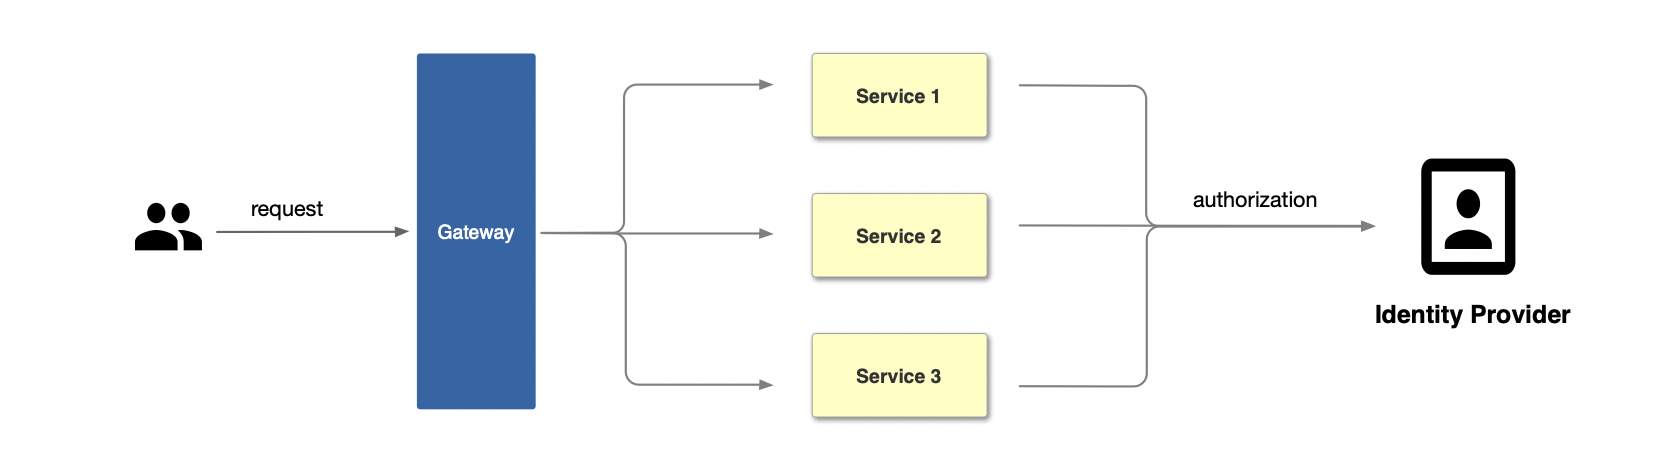 Flowchart of traditional authentication mode